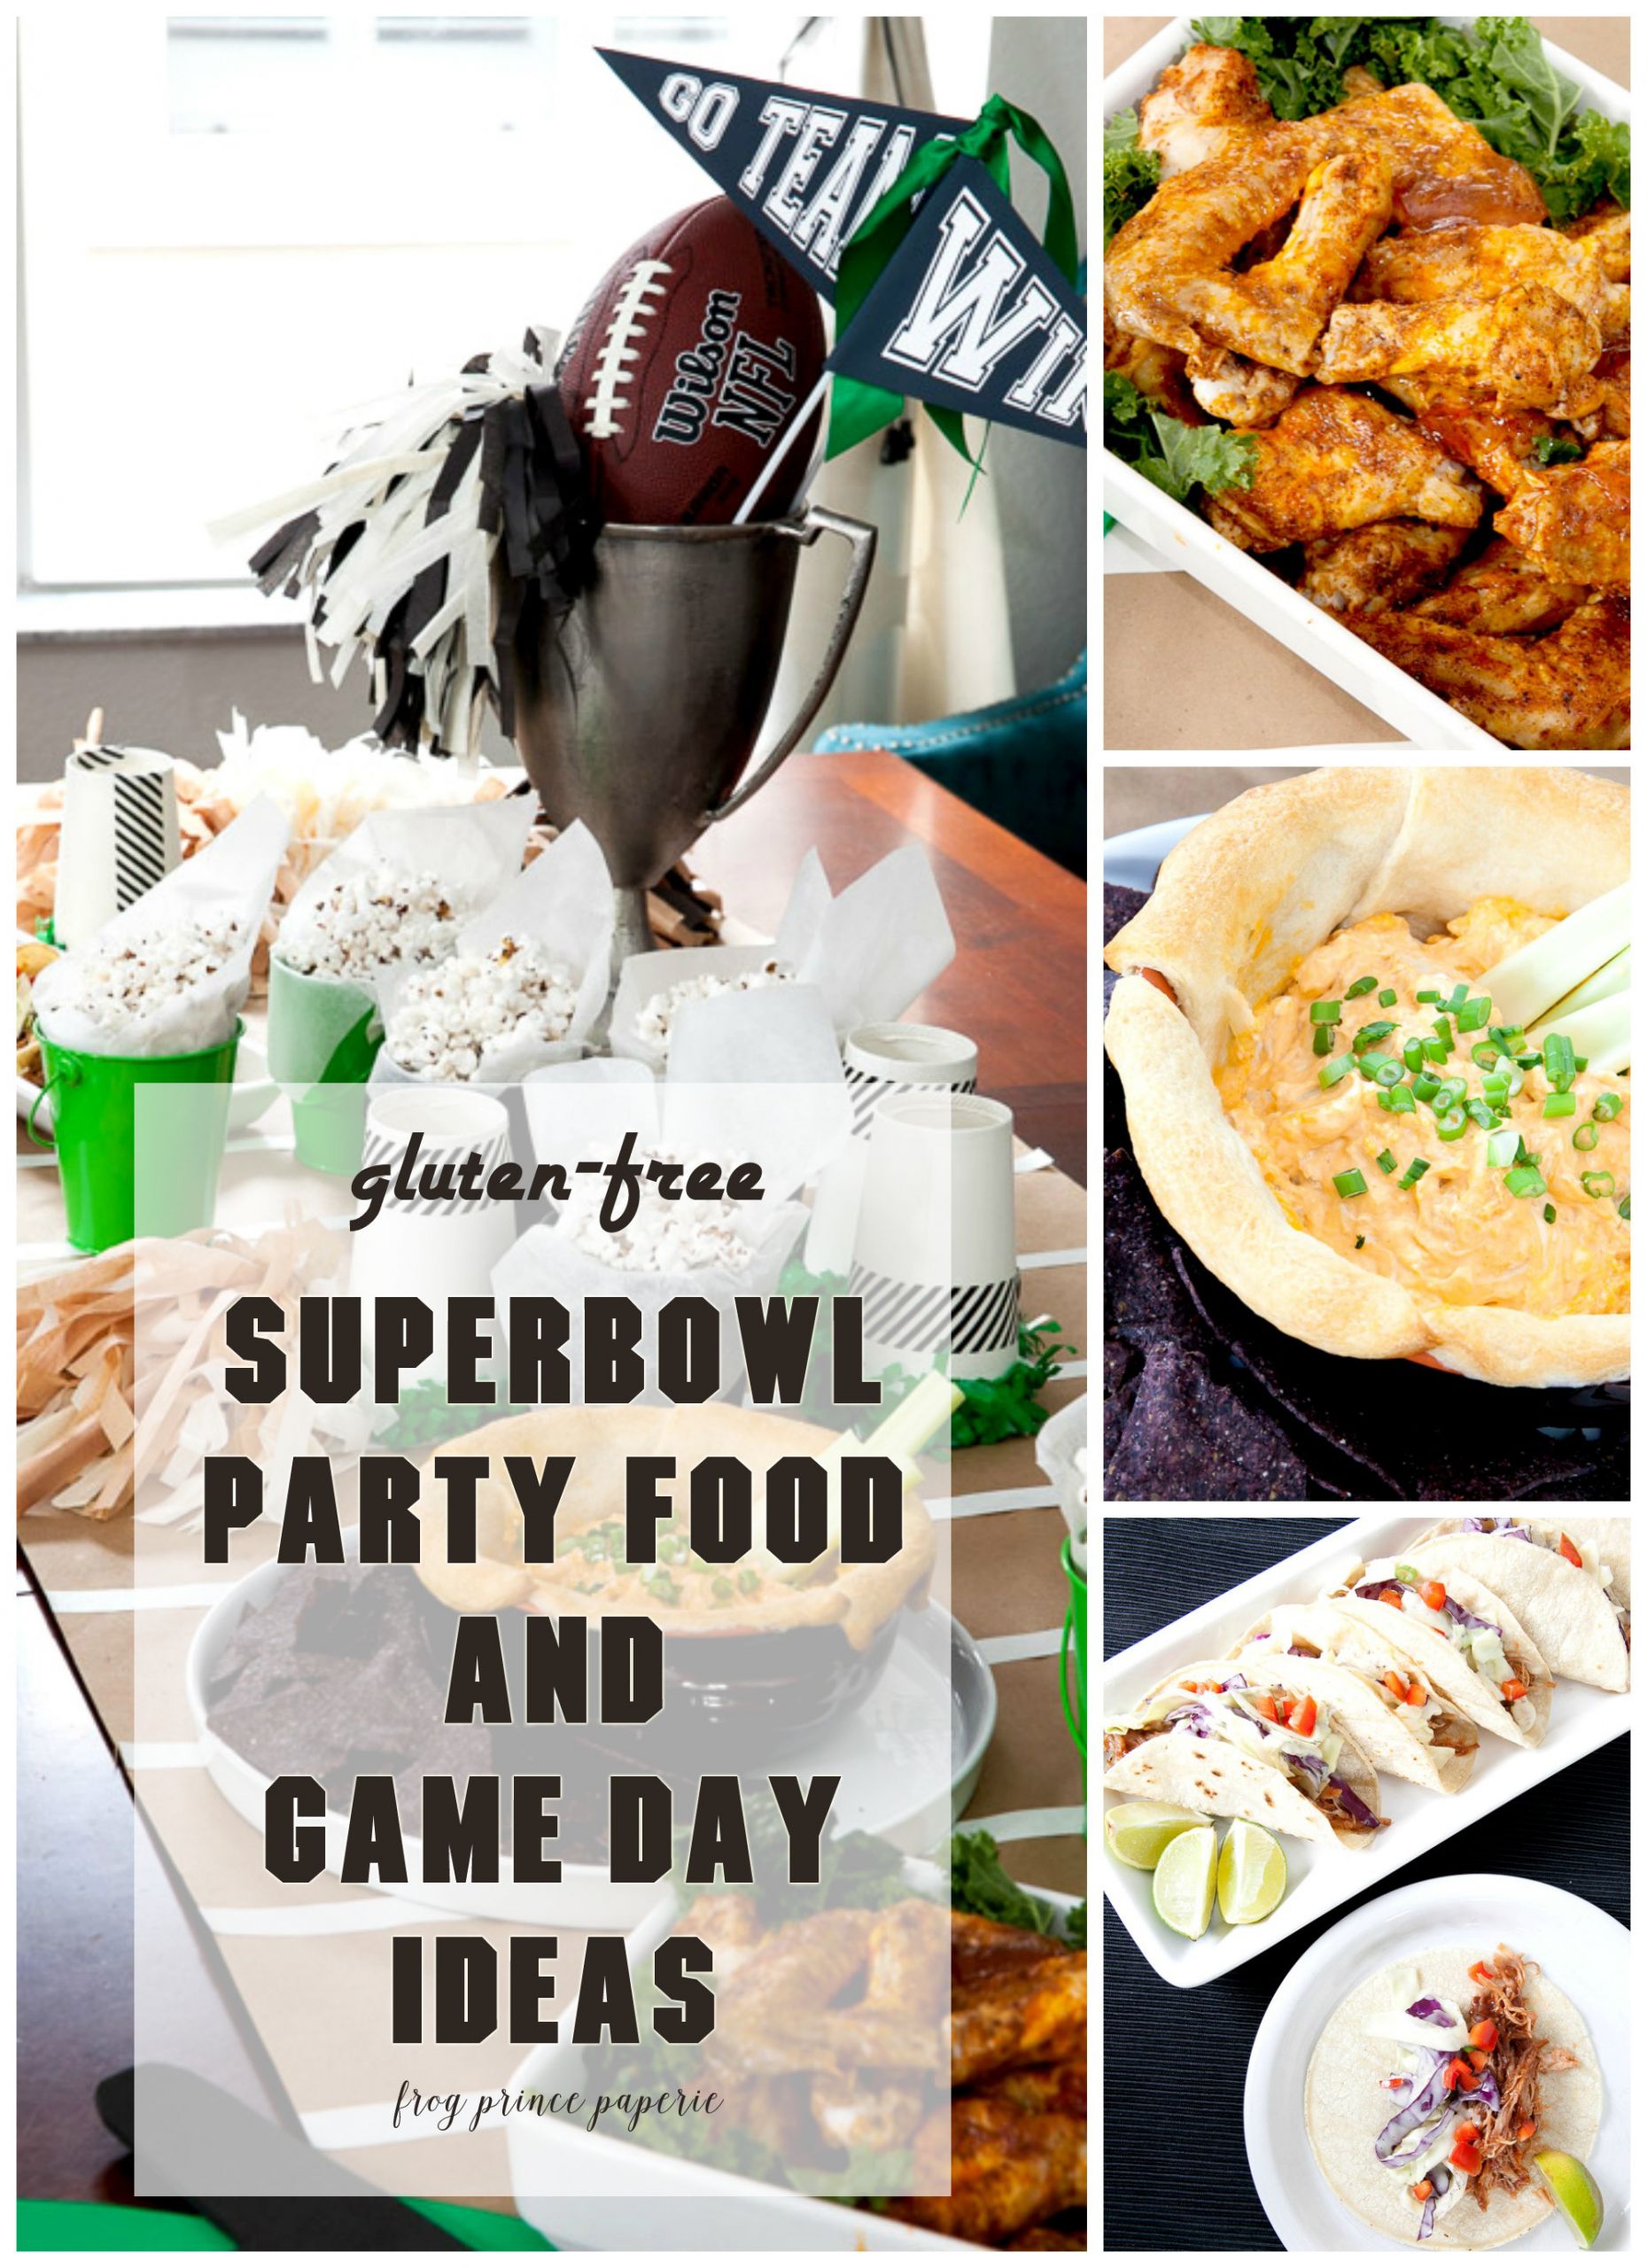 Gluten Free Party Food Ideas
 Gluten Free Superbowl Party Food Savory Baked Chicken